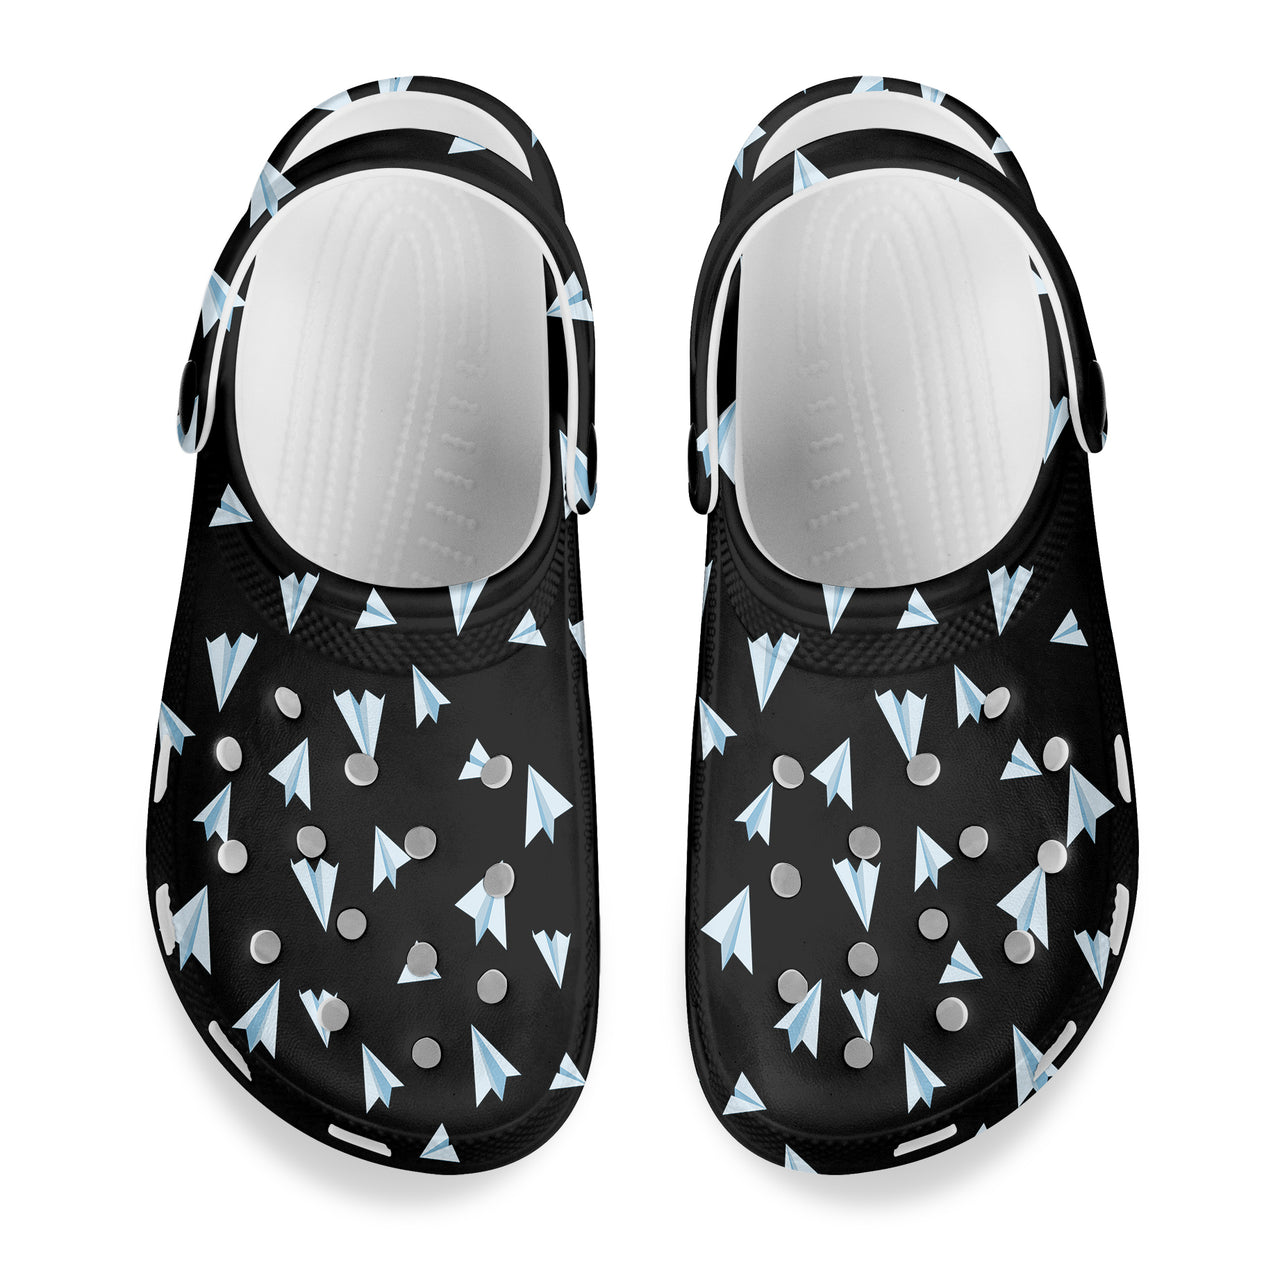 Paper Airplanes (Black) Designed Hole Shoes & Slippers (MEN)